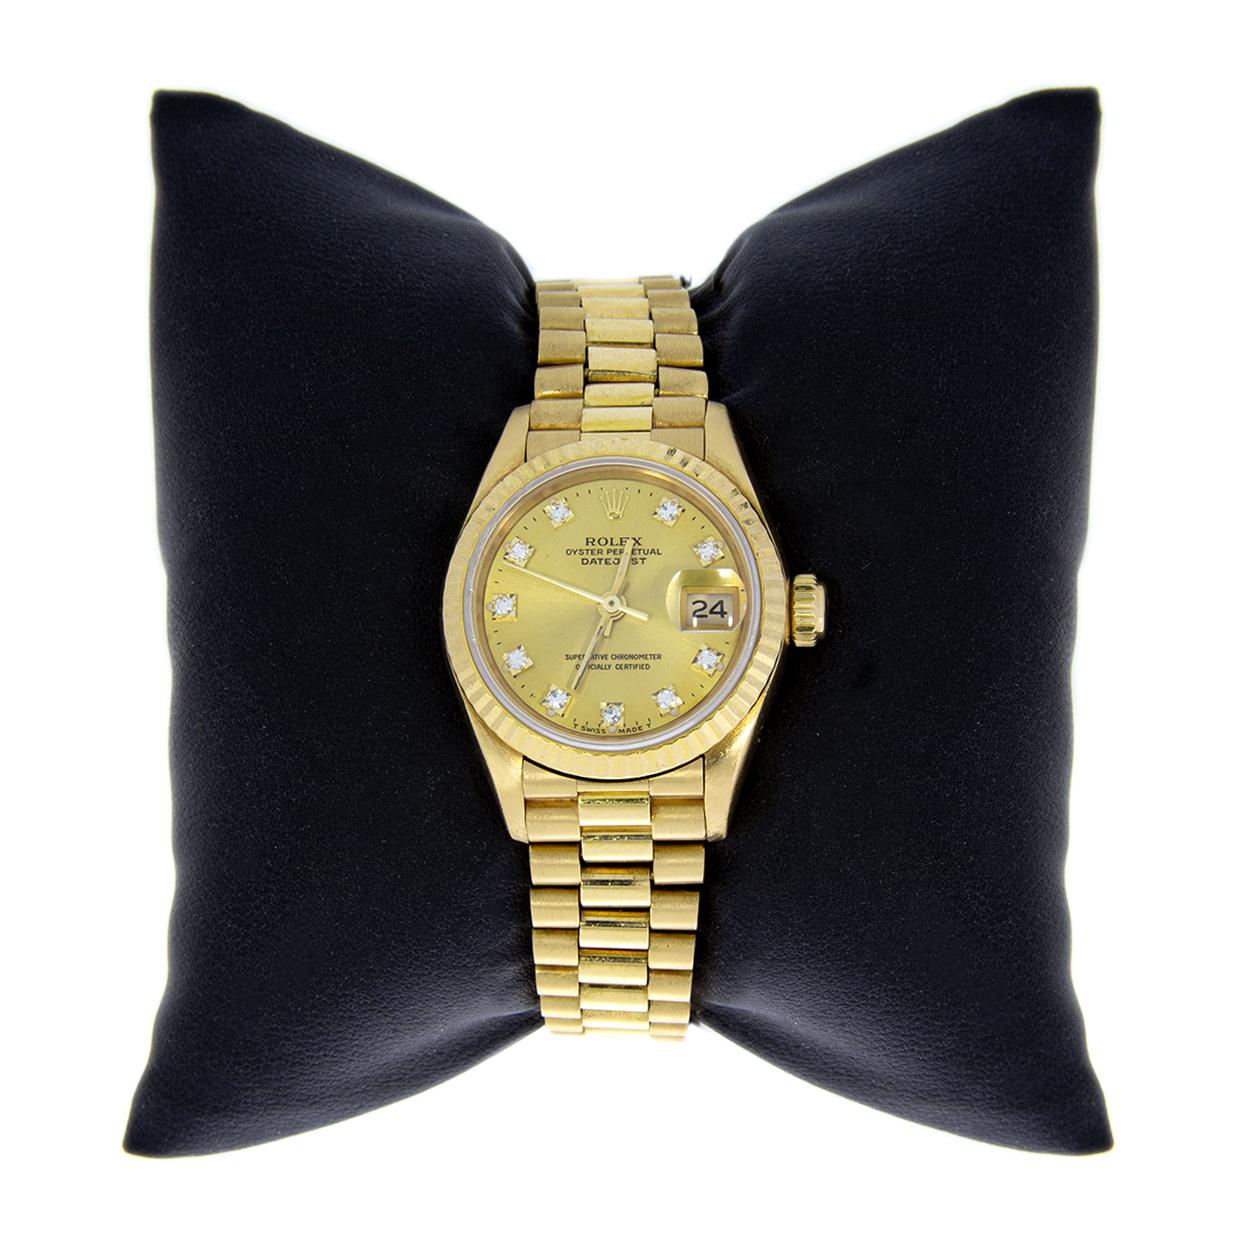 Item Details
Brand Rolex
Case Material Yellow Gold
Gender Women's
MPN 69178
Face Color Yellow
Band Type Bracelet
Case Size 26 mm
Style Dress
Dial Champagne Diamond
Approximate Year 1989

Pioneers of the wristwatch since 1905, Rolex is at the origin